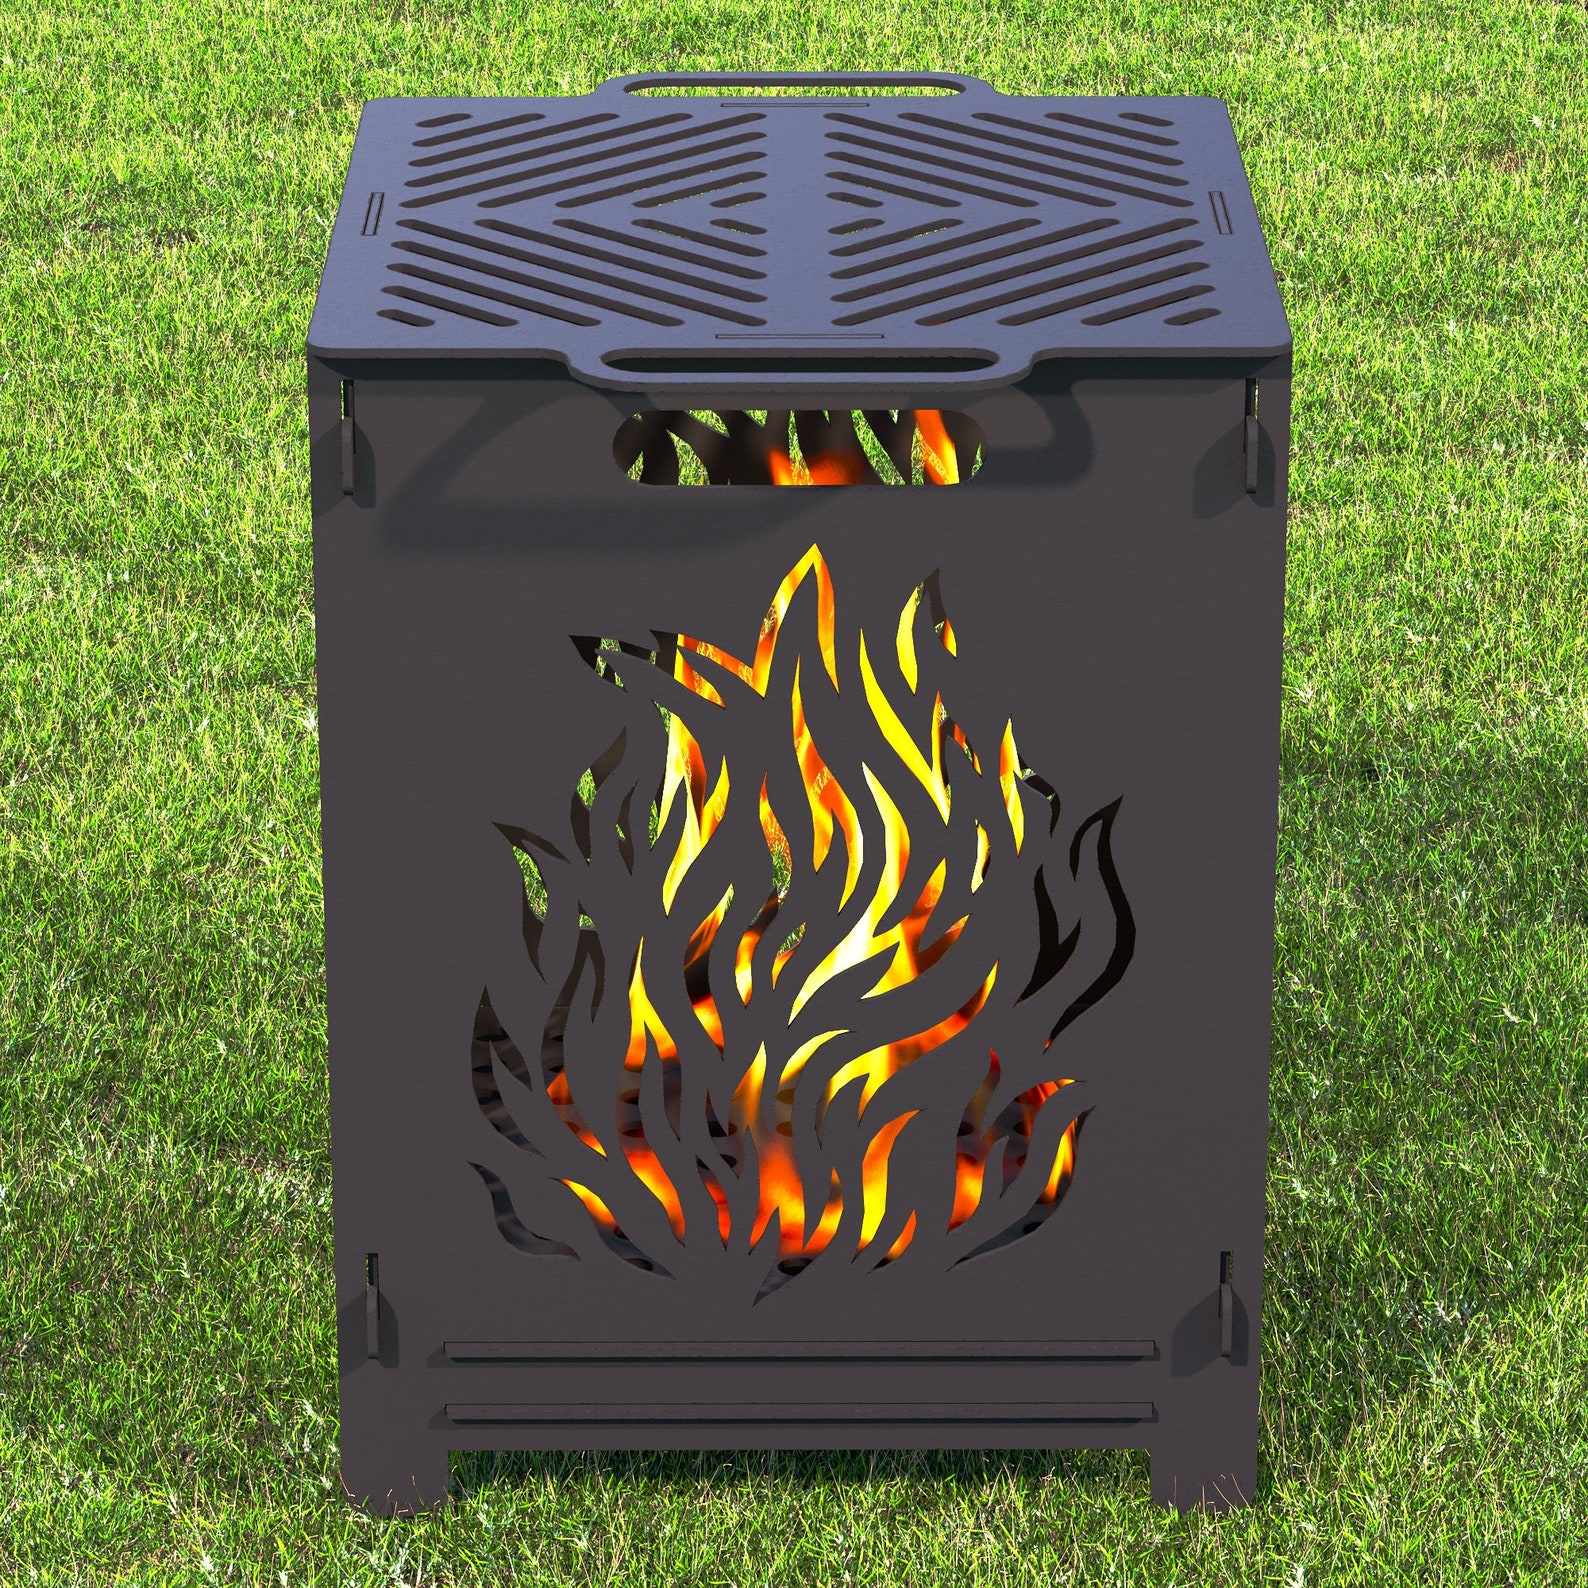 Fire Pit fire,bbq Barbecue Dxf,svg Files for Plasma,laser,grill ...